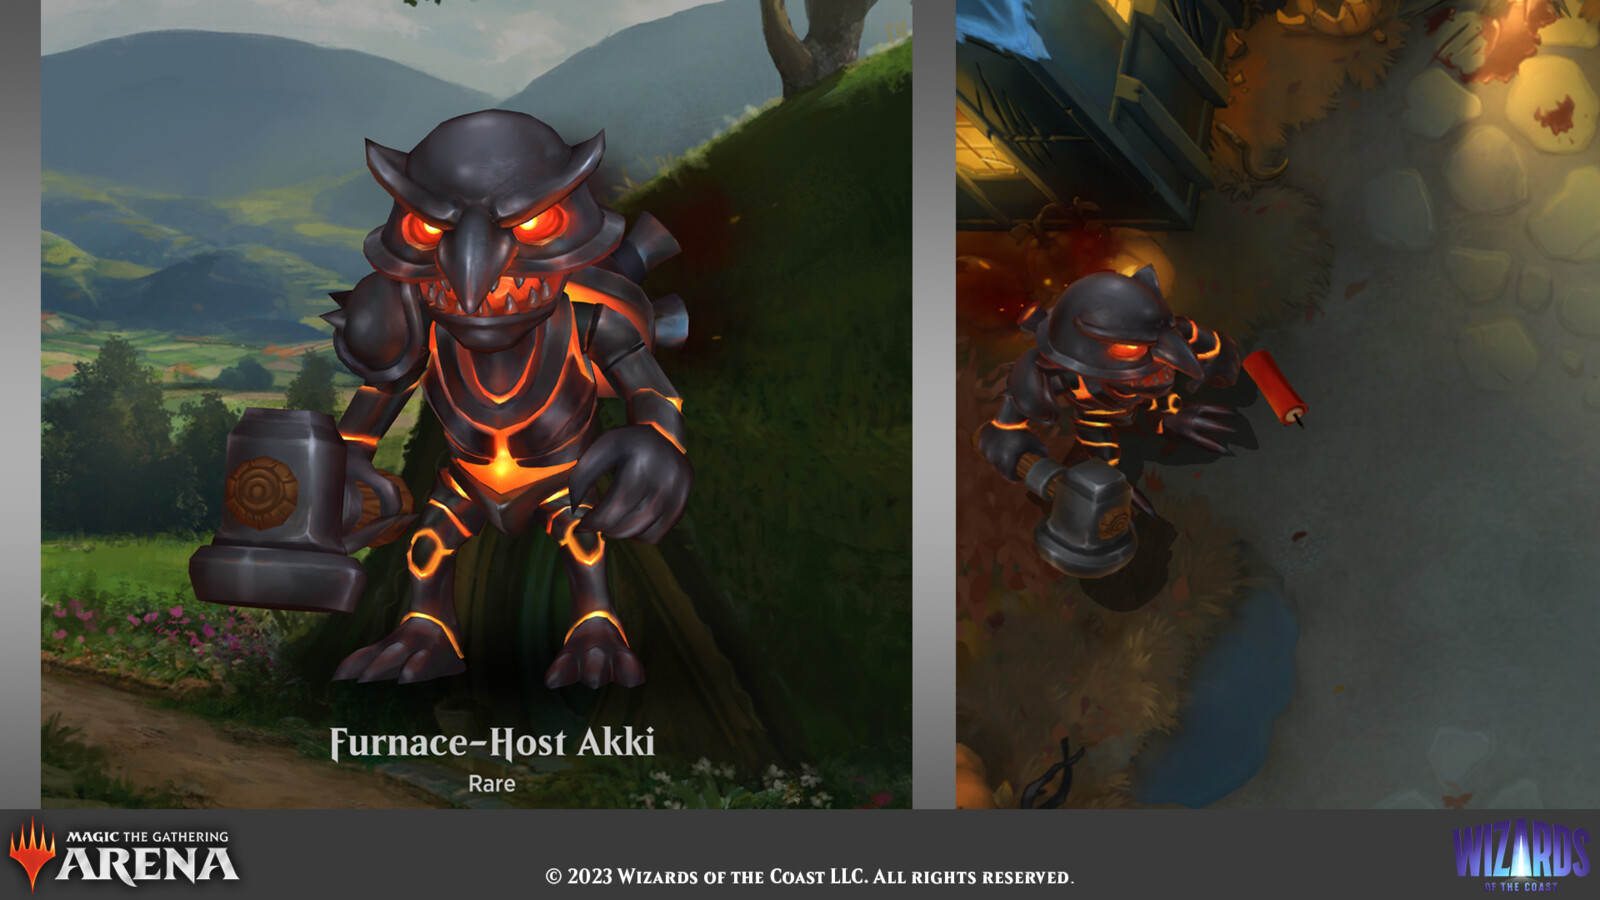 Select pet and game views for the Furnace-Host Akki